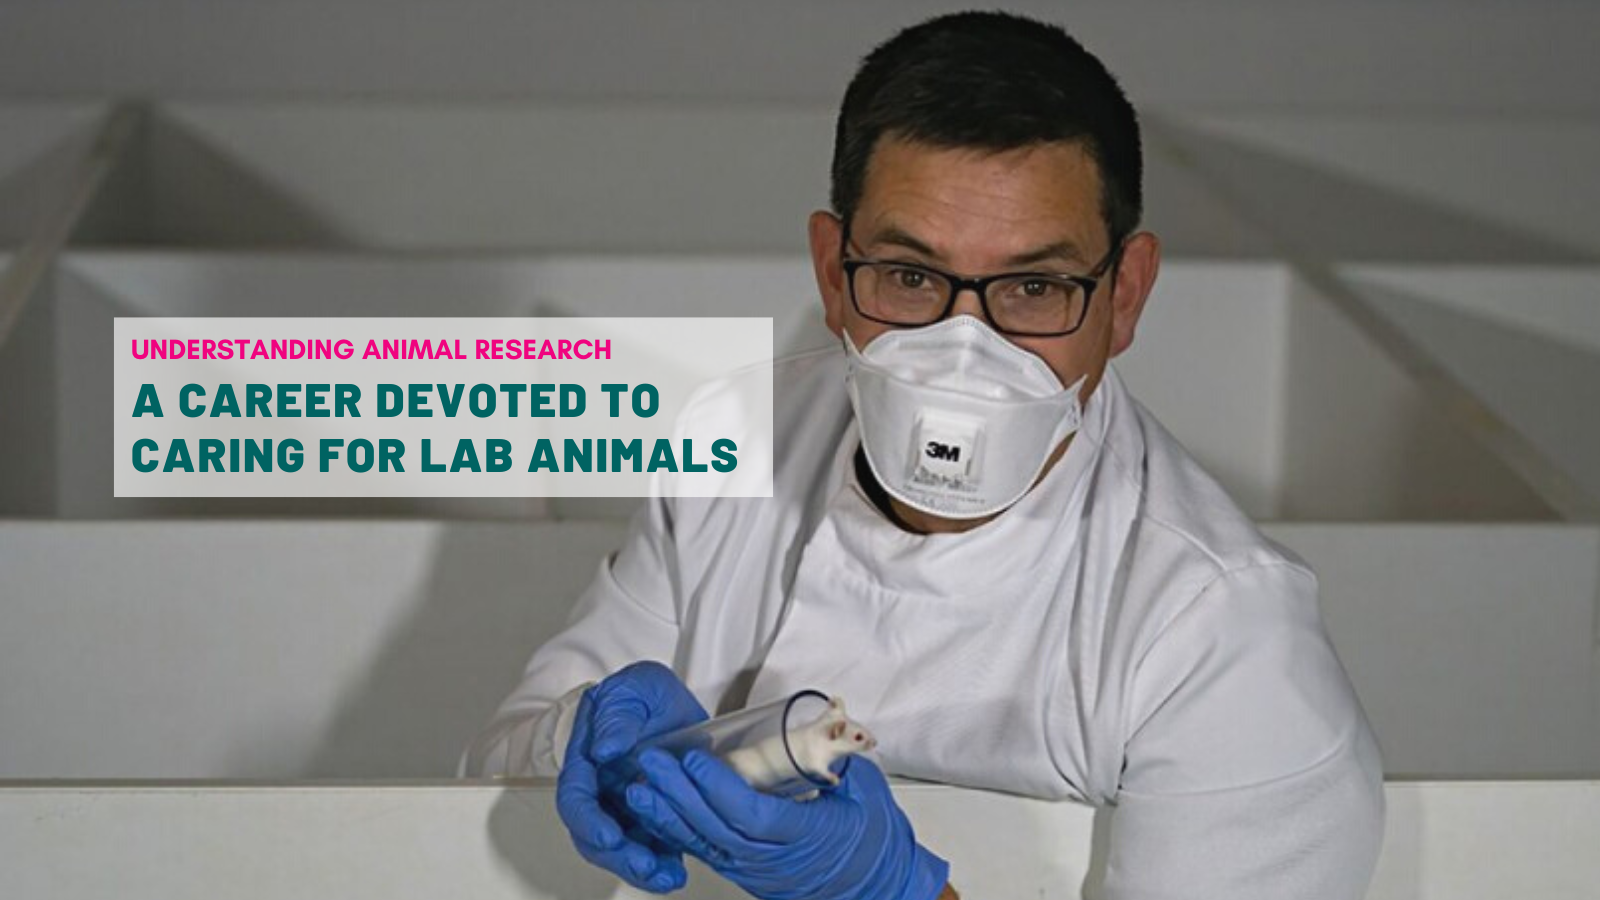 A career devoted to caring for lab animals